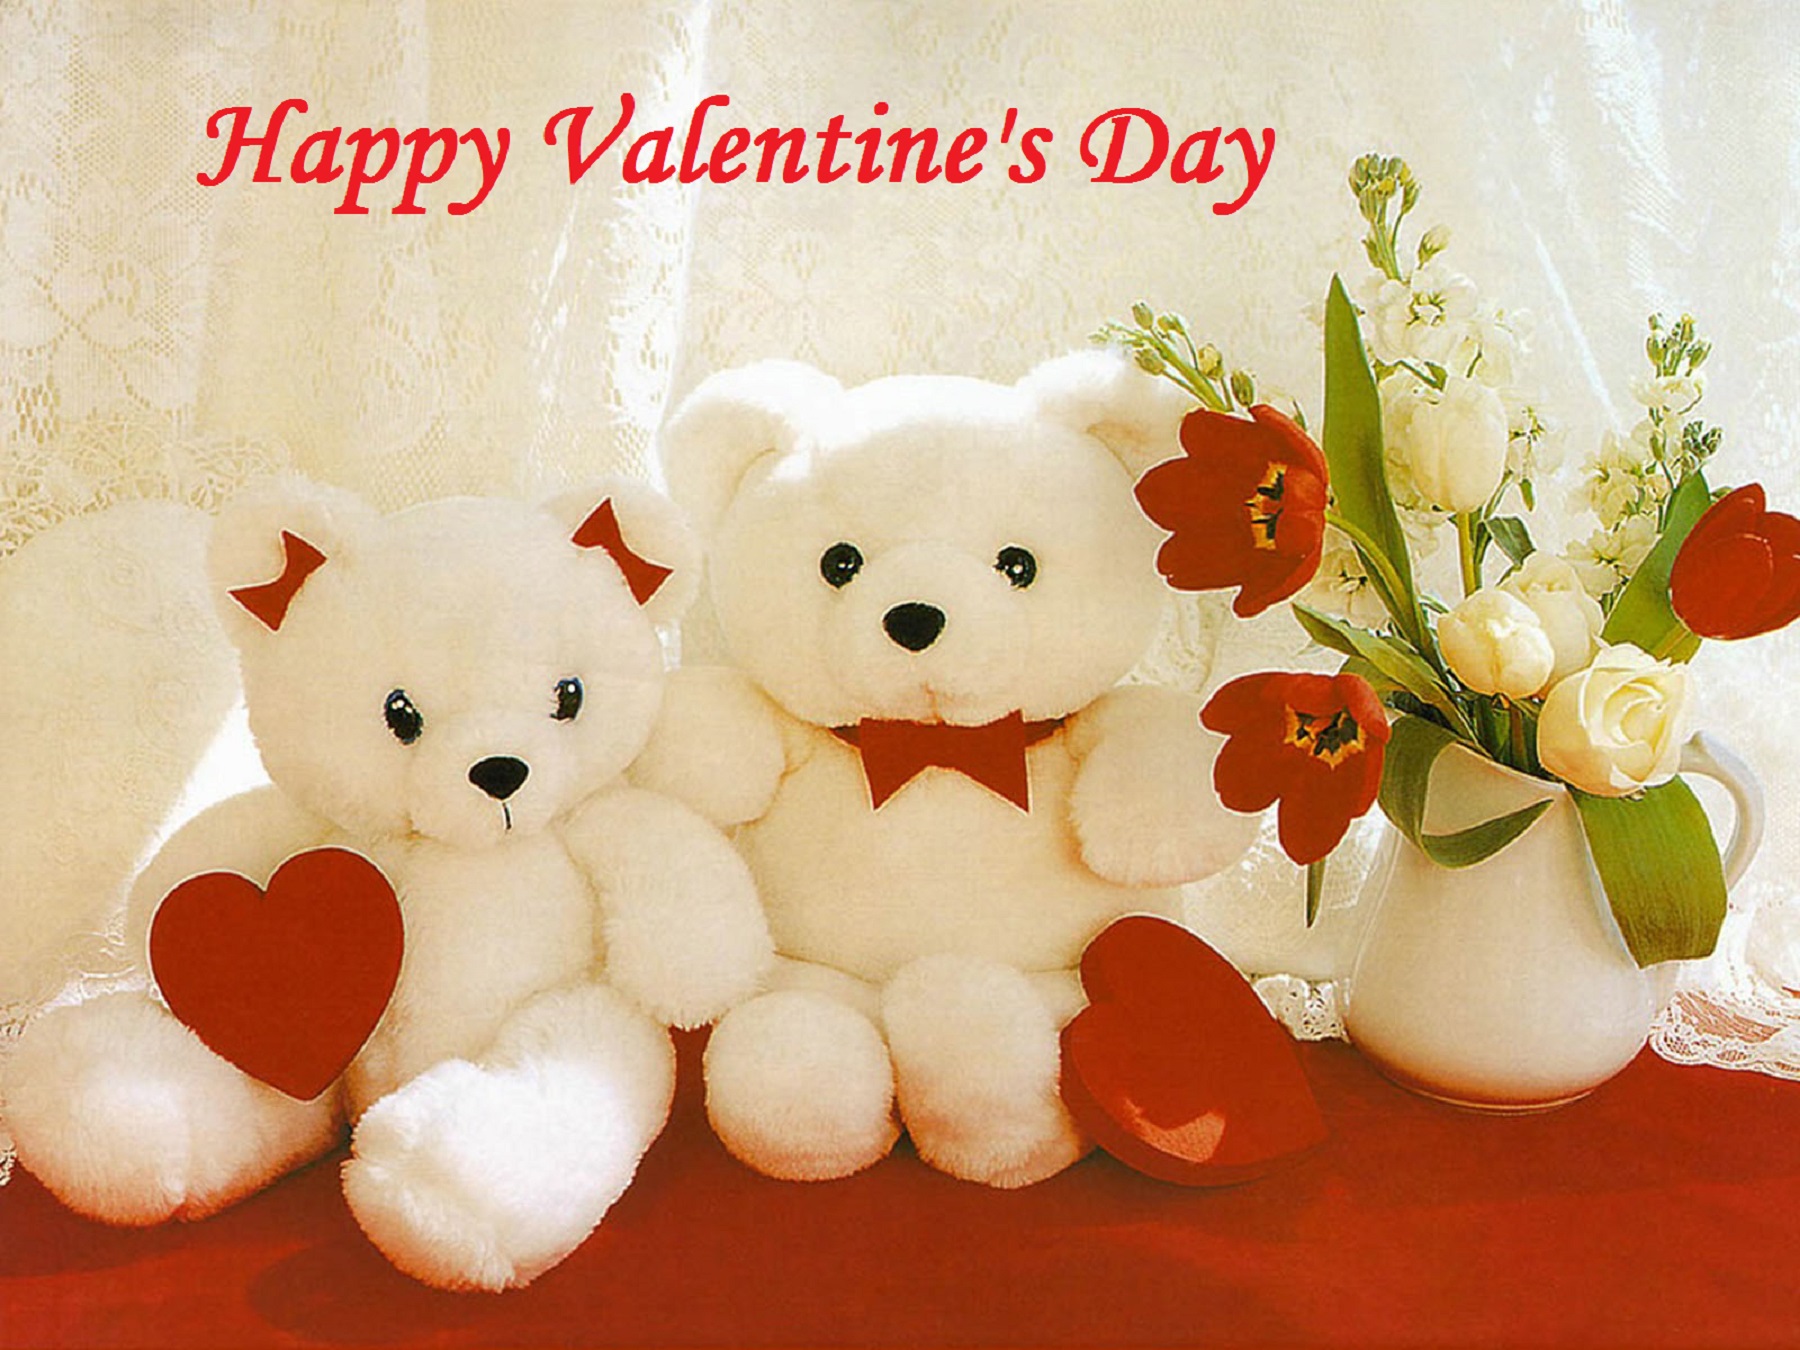 happy valentines day images free download